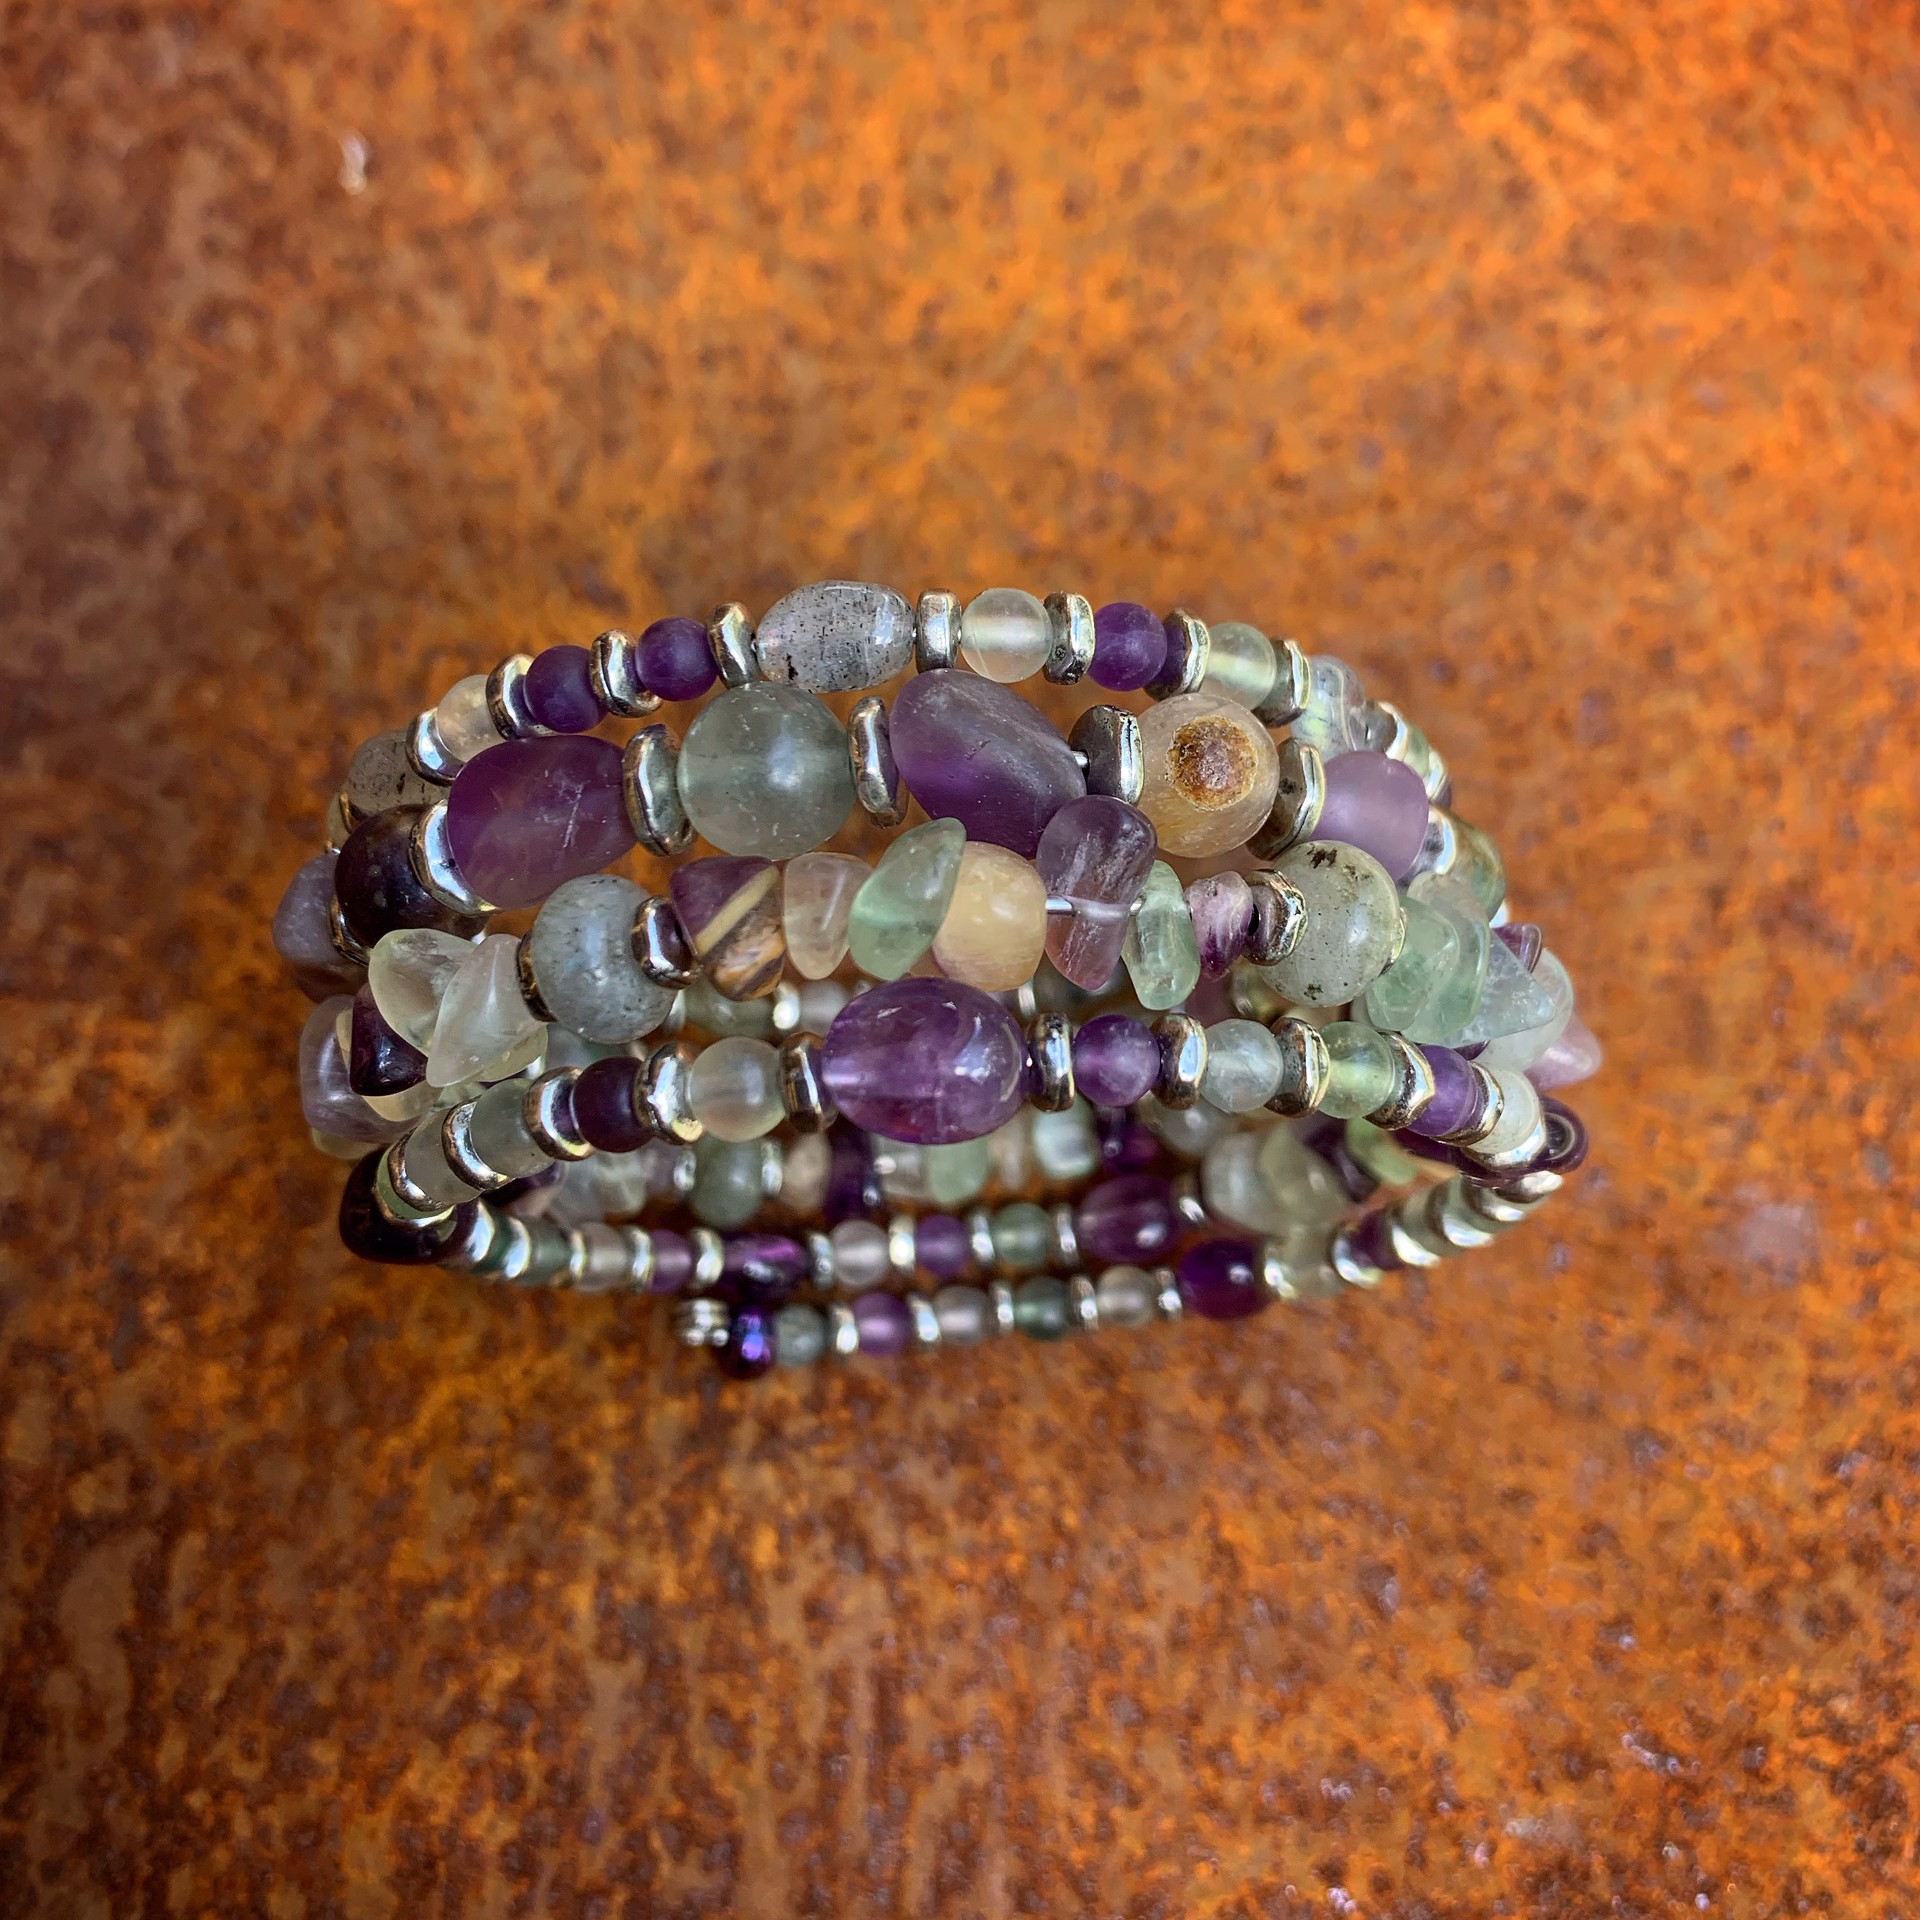 K625 Fluorite and Amethyst by Kelly Ormsby